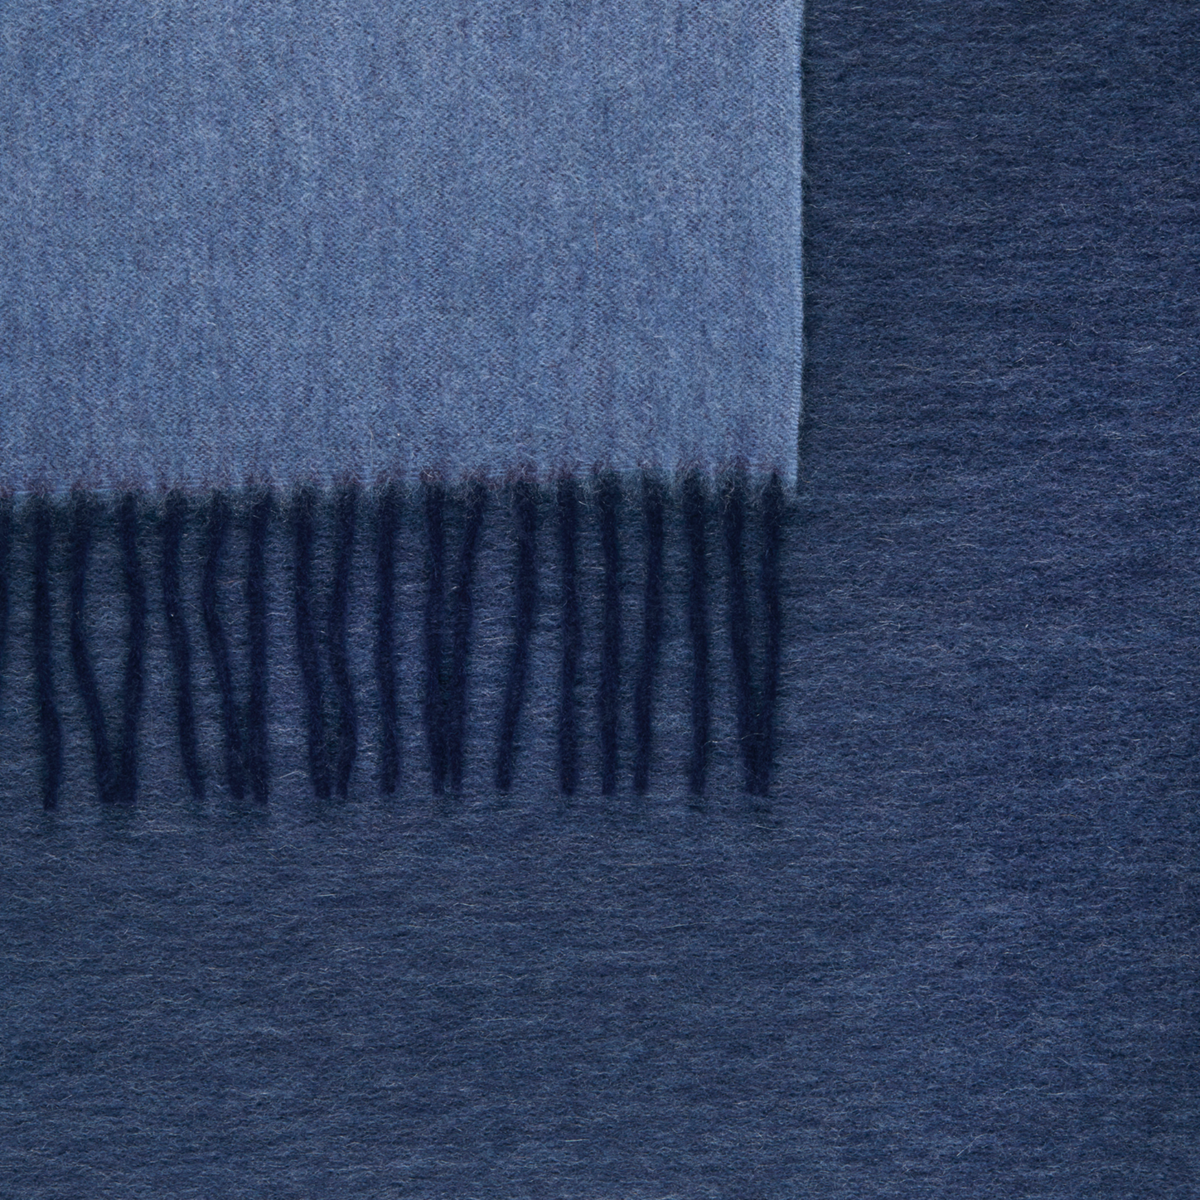 Swatch Sample of Matouk Paley Throws in Navy/Chambray Color